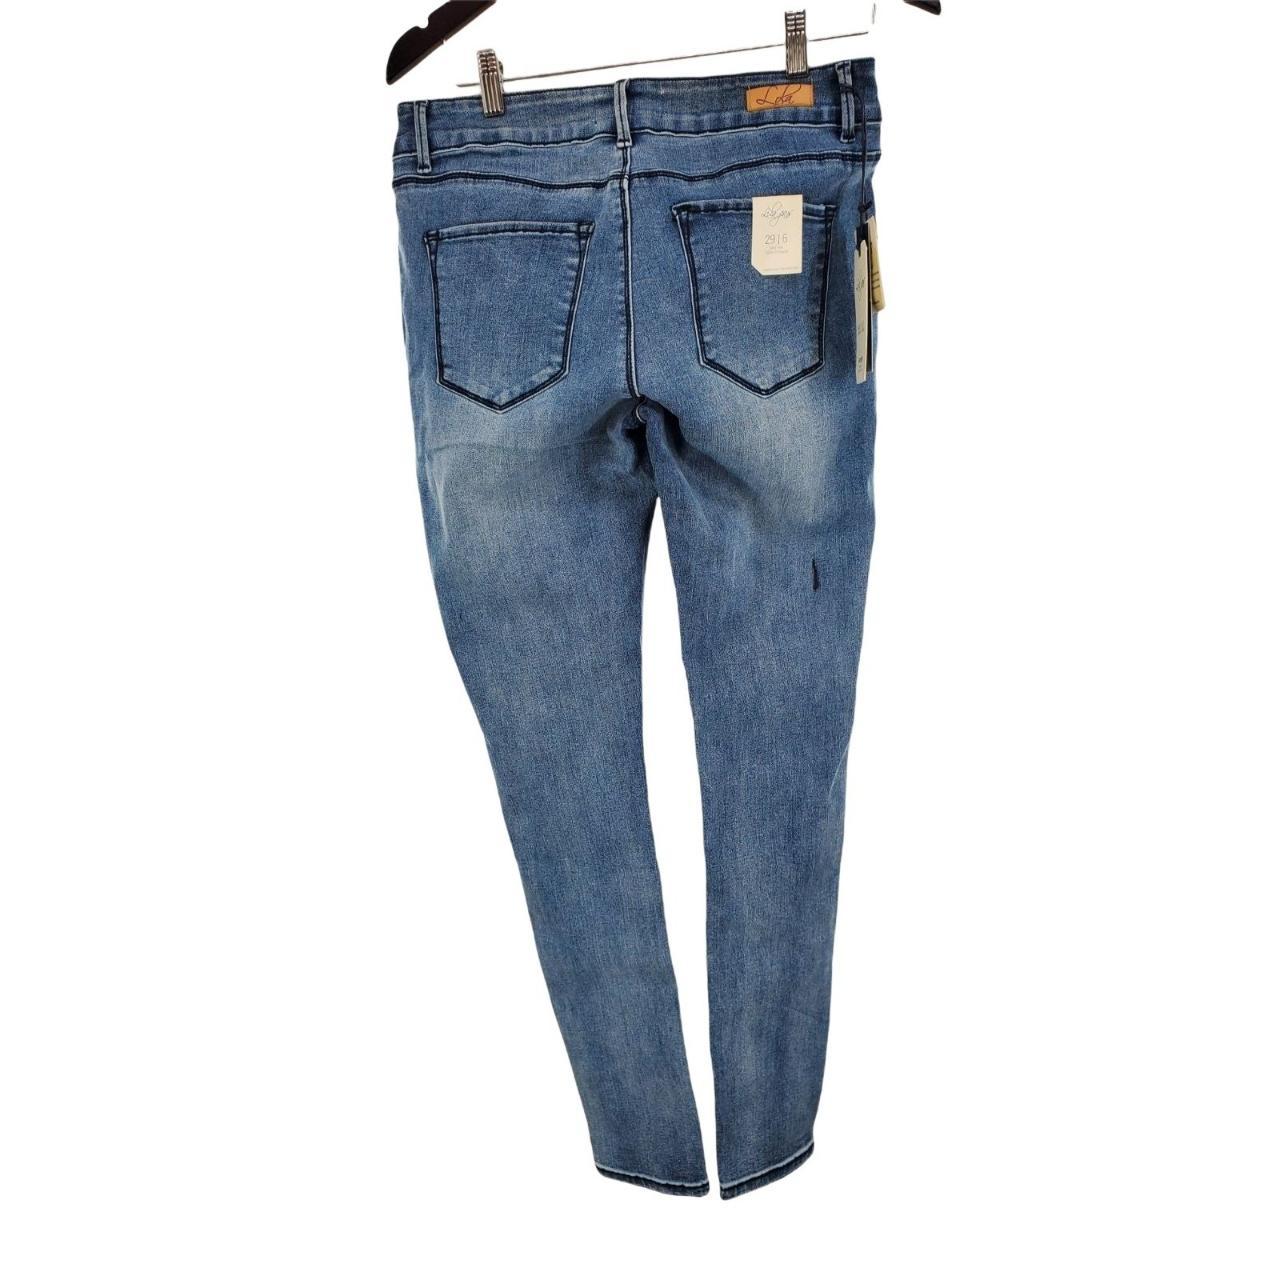 Product Image 2 - LOLA JEANS $98

Women's Size: 6